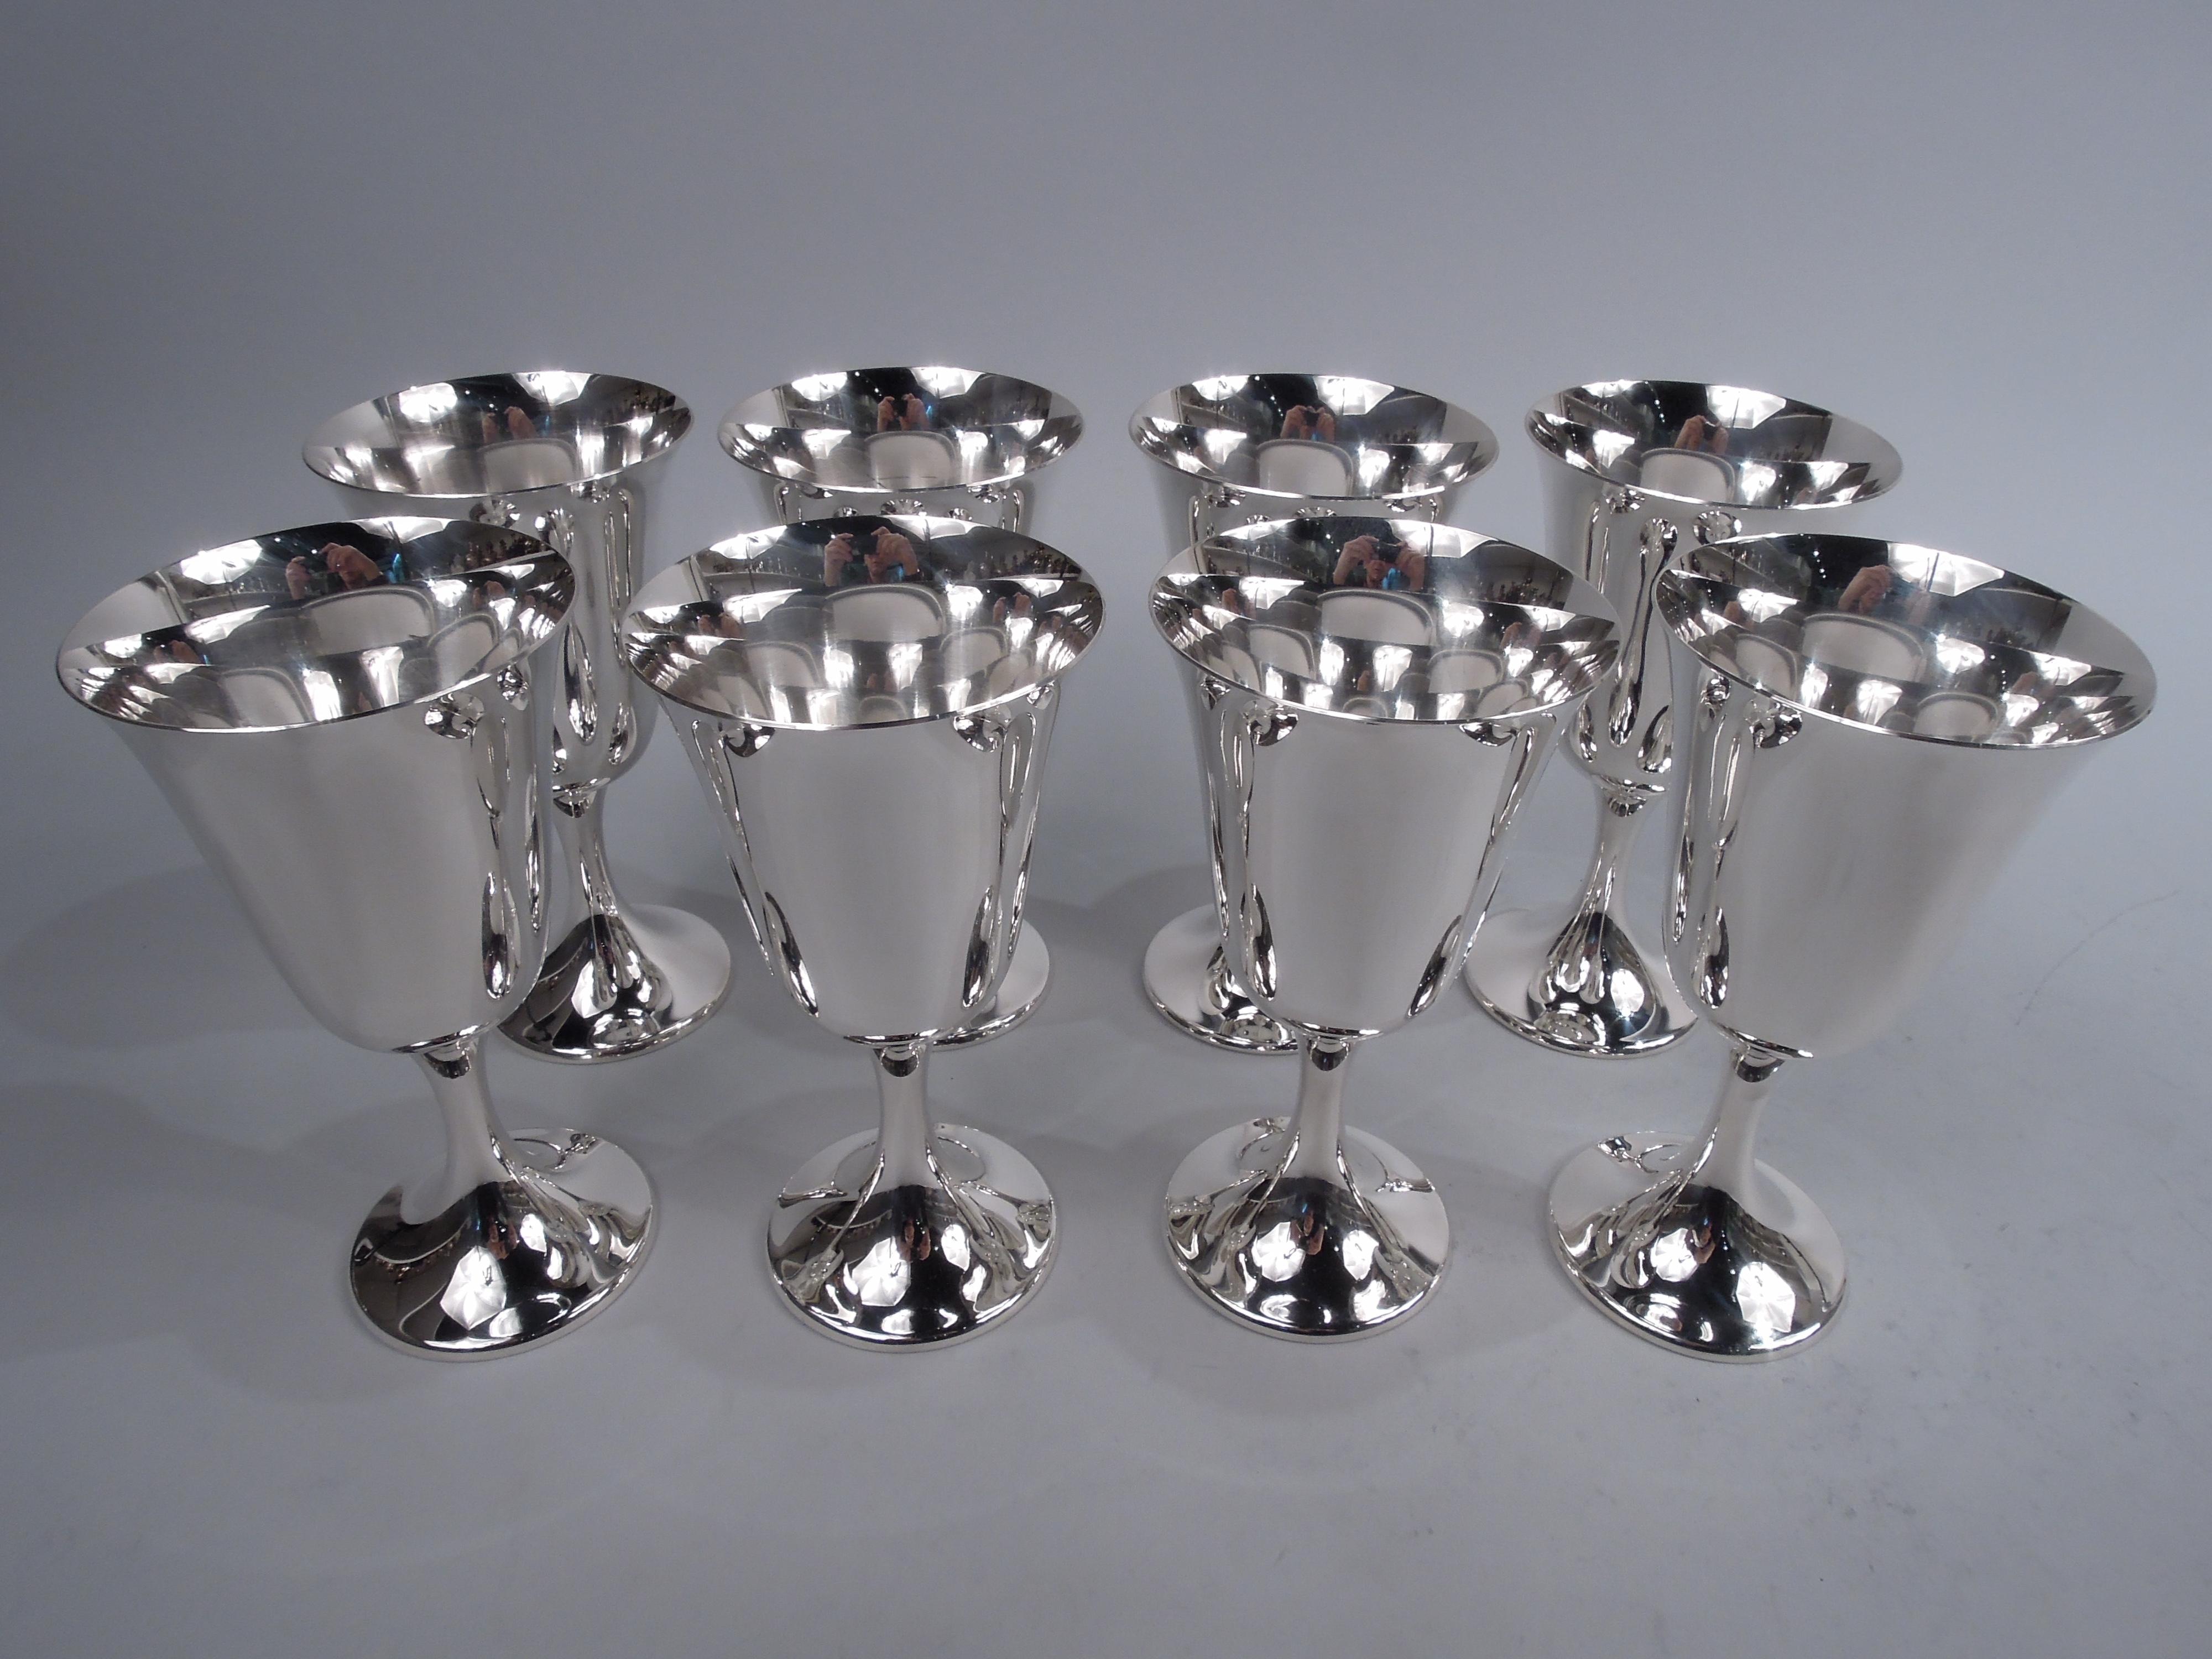 Set of 8 Puritan sterling silver goblets. Made by Gorham in Providence. Each: Spare and elegant form with subtle bell-form bowl on cylindrical stem flowing into raised foot. Works best when filled and refilled. Don’t be fooled by the pattern name. A